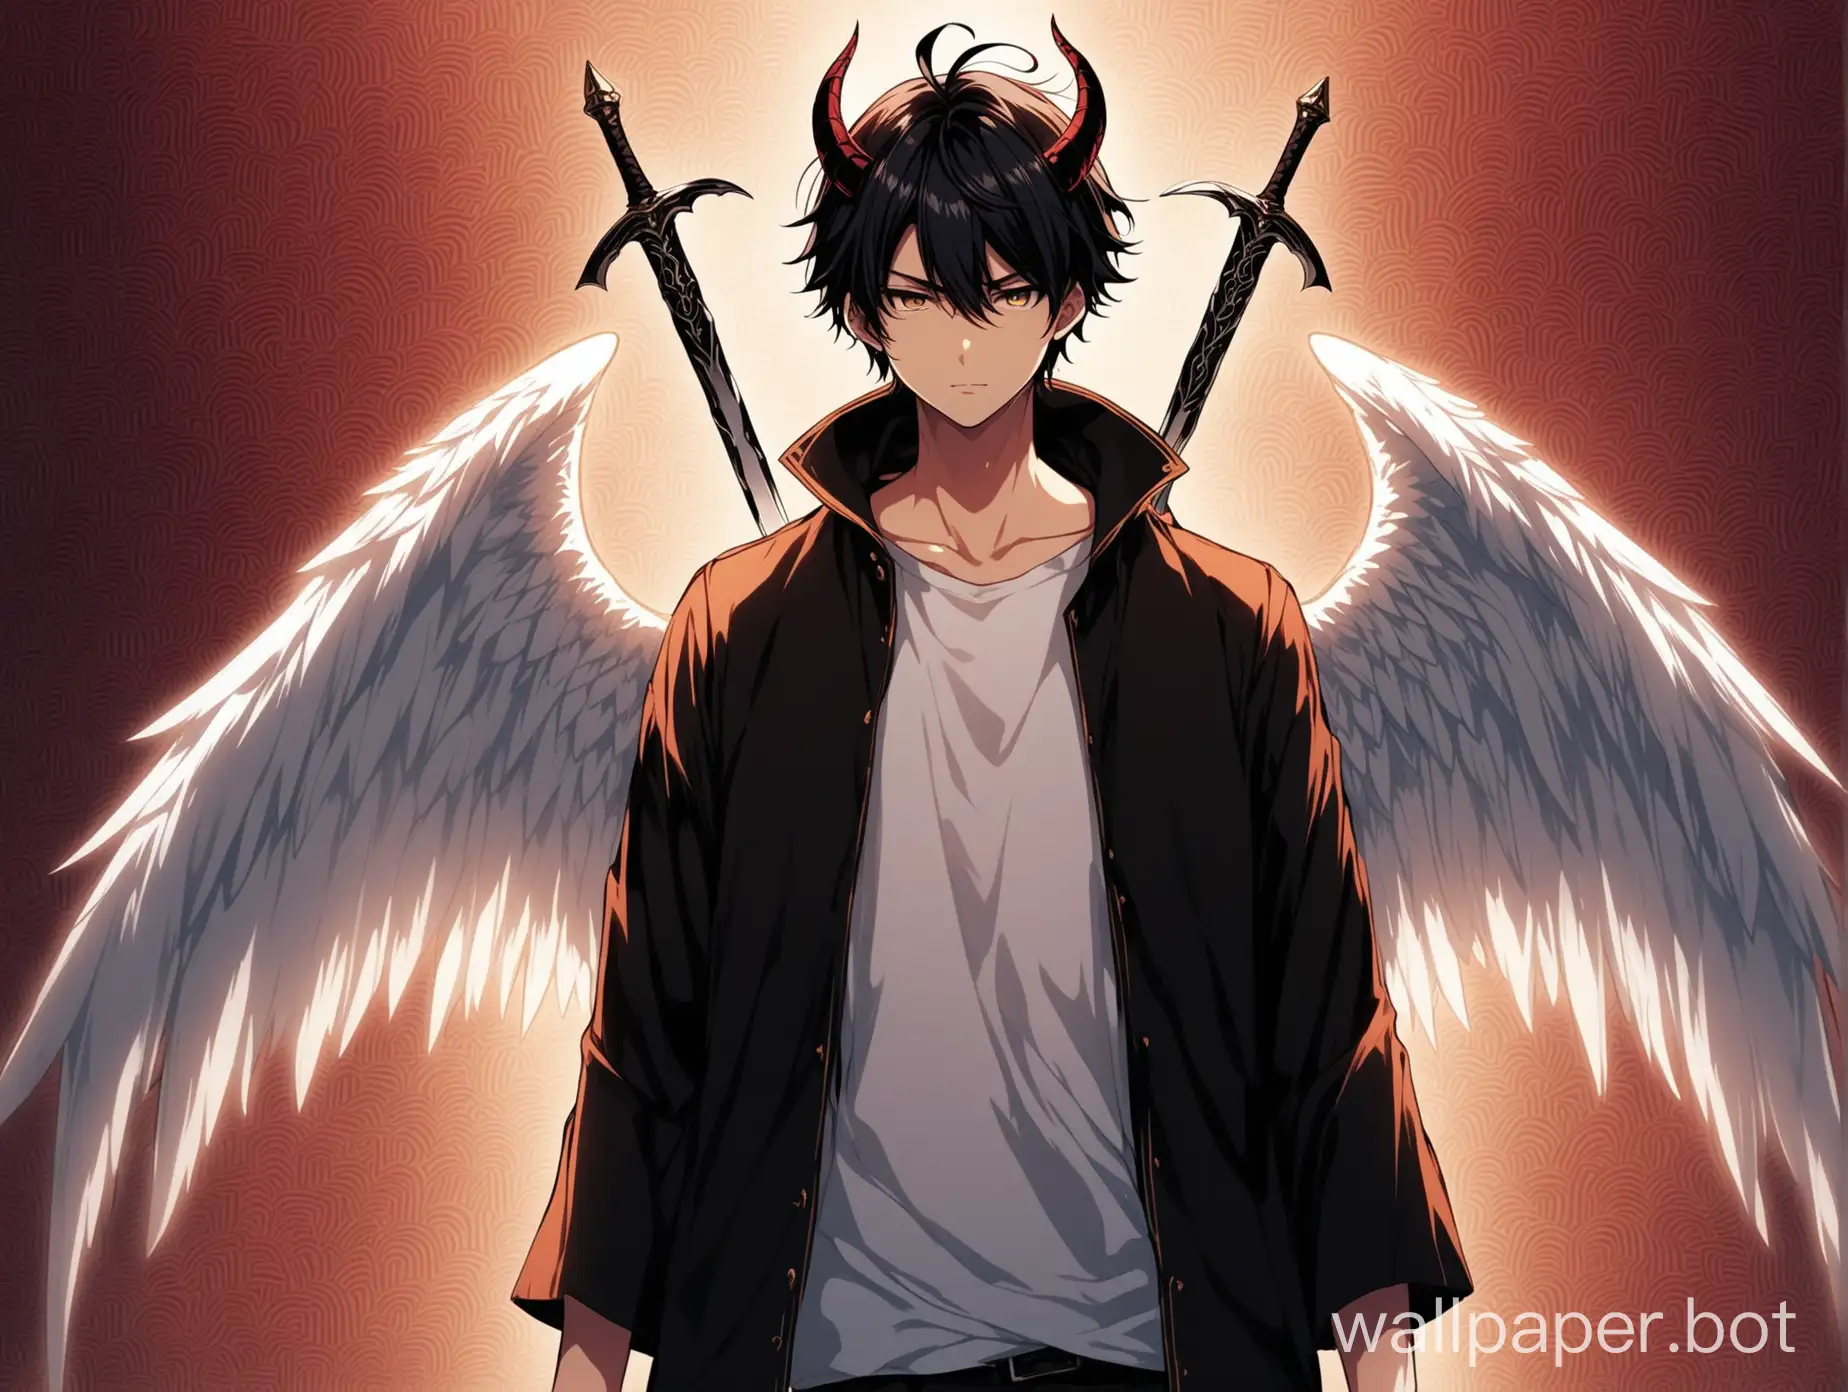 make me a landscape anime wallpaper of a guy holding 2 blades in the middle of the screen and the wall paper has a thin line in the middle on 1 side of the line its a devil version of him and on the other side as a angel